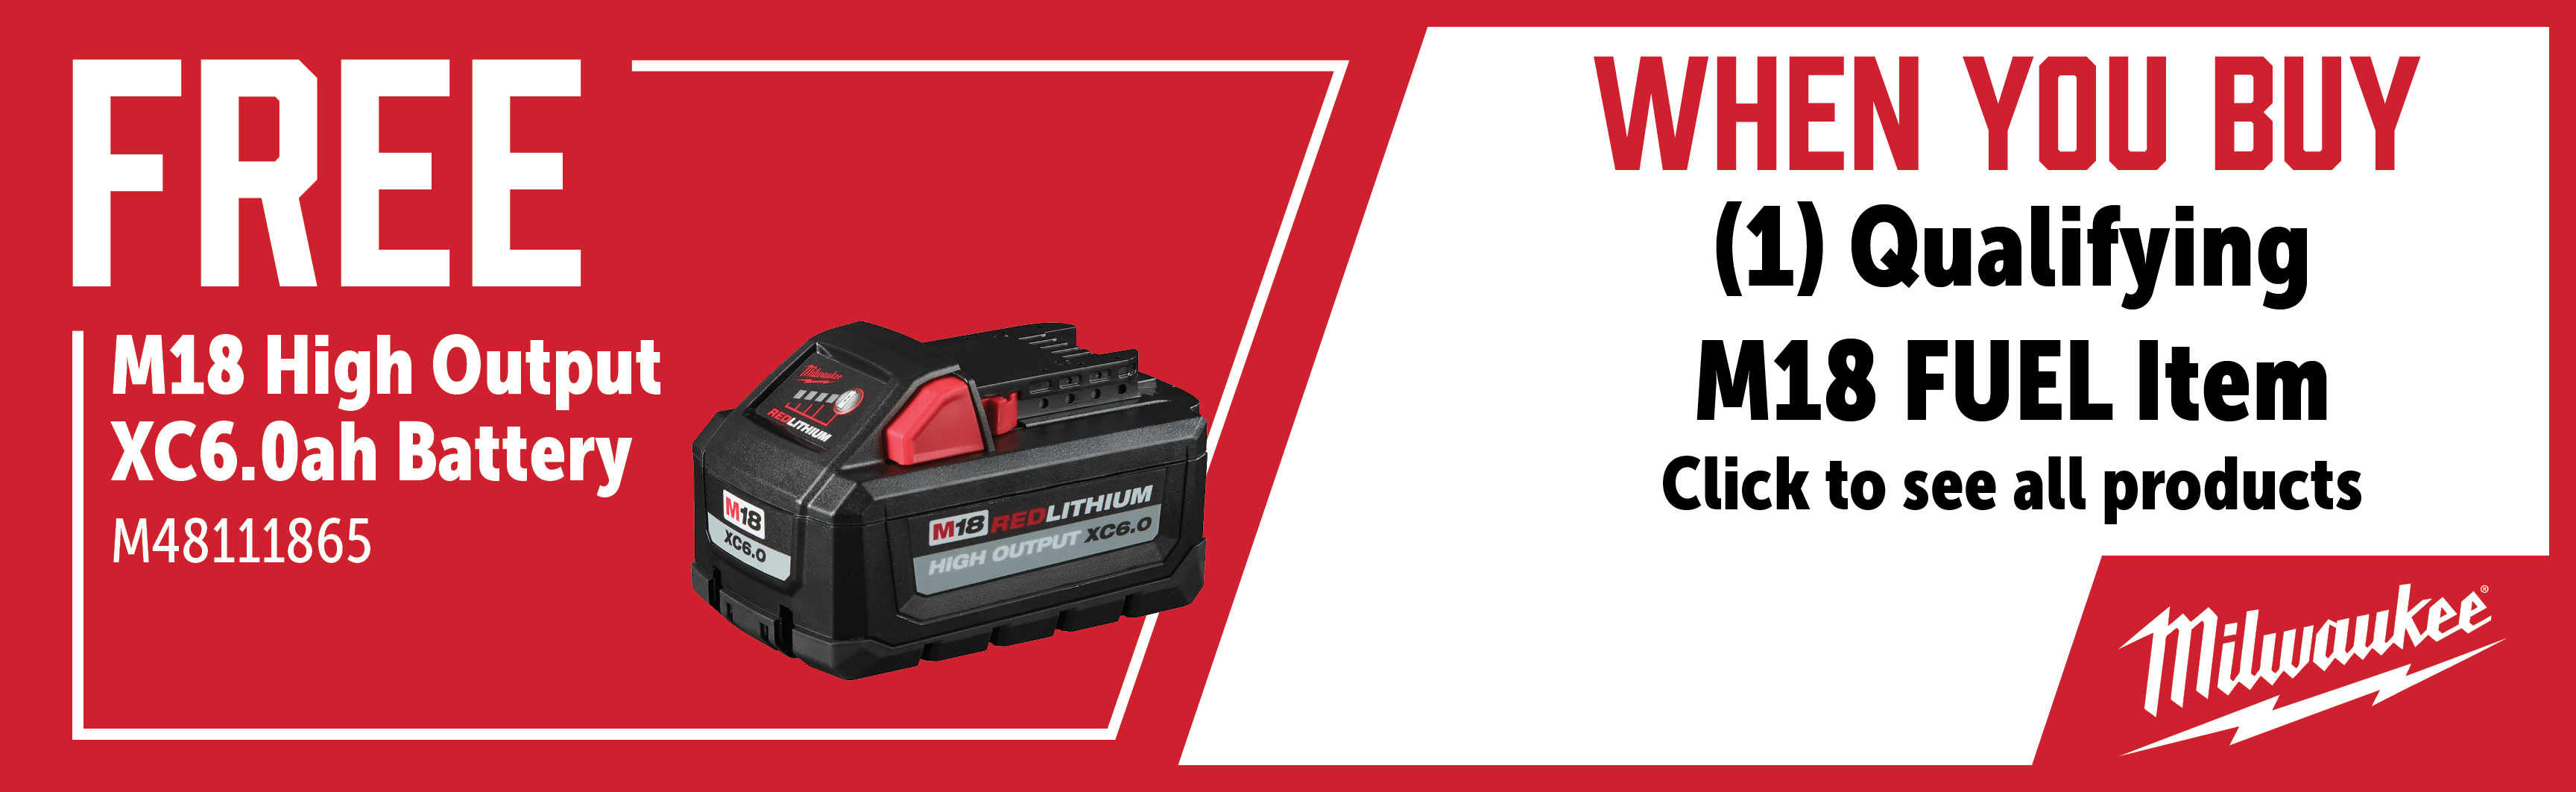 Milwaukee Mar-Jul: Buy a Qualifying M18 Fuel Bare Tool and Get a FREE M48111865